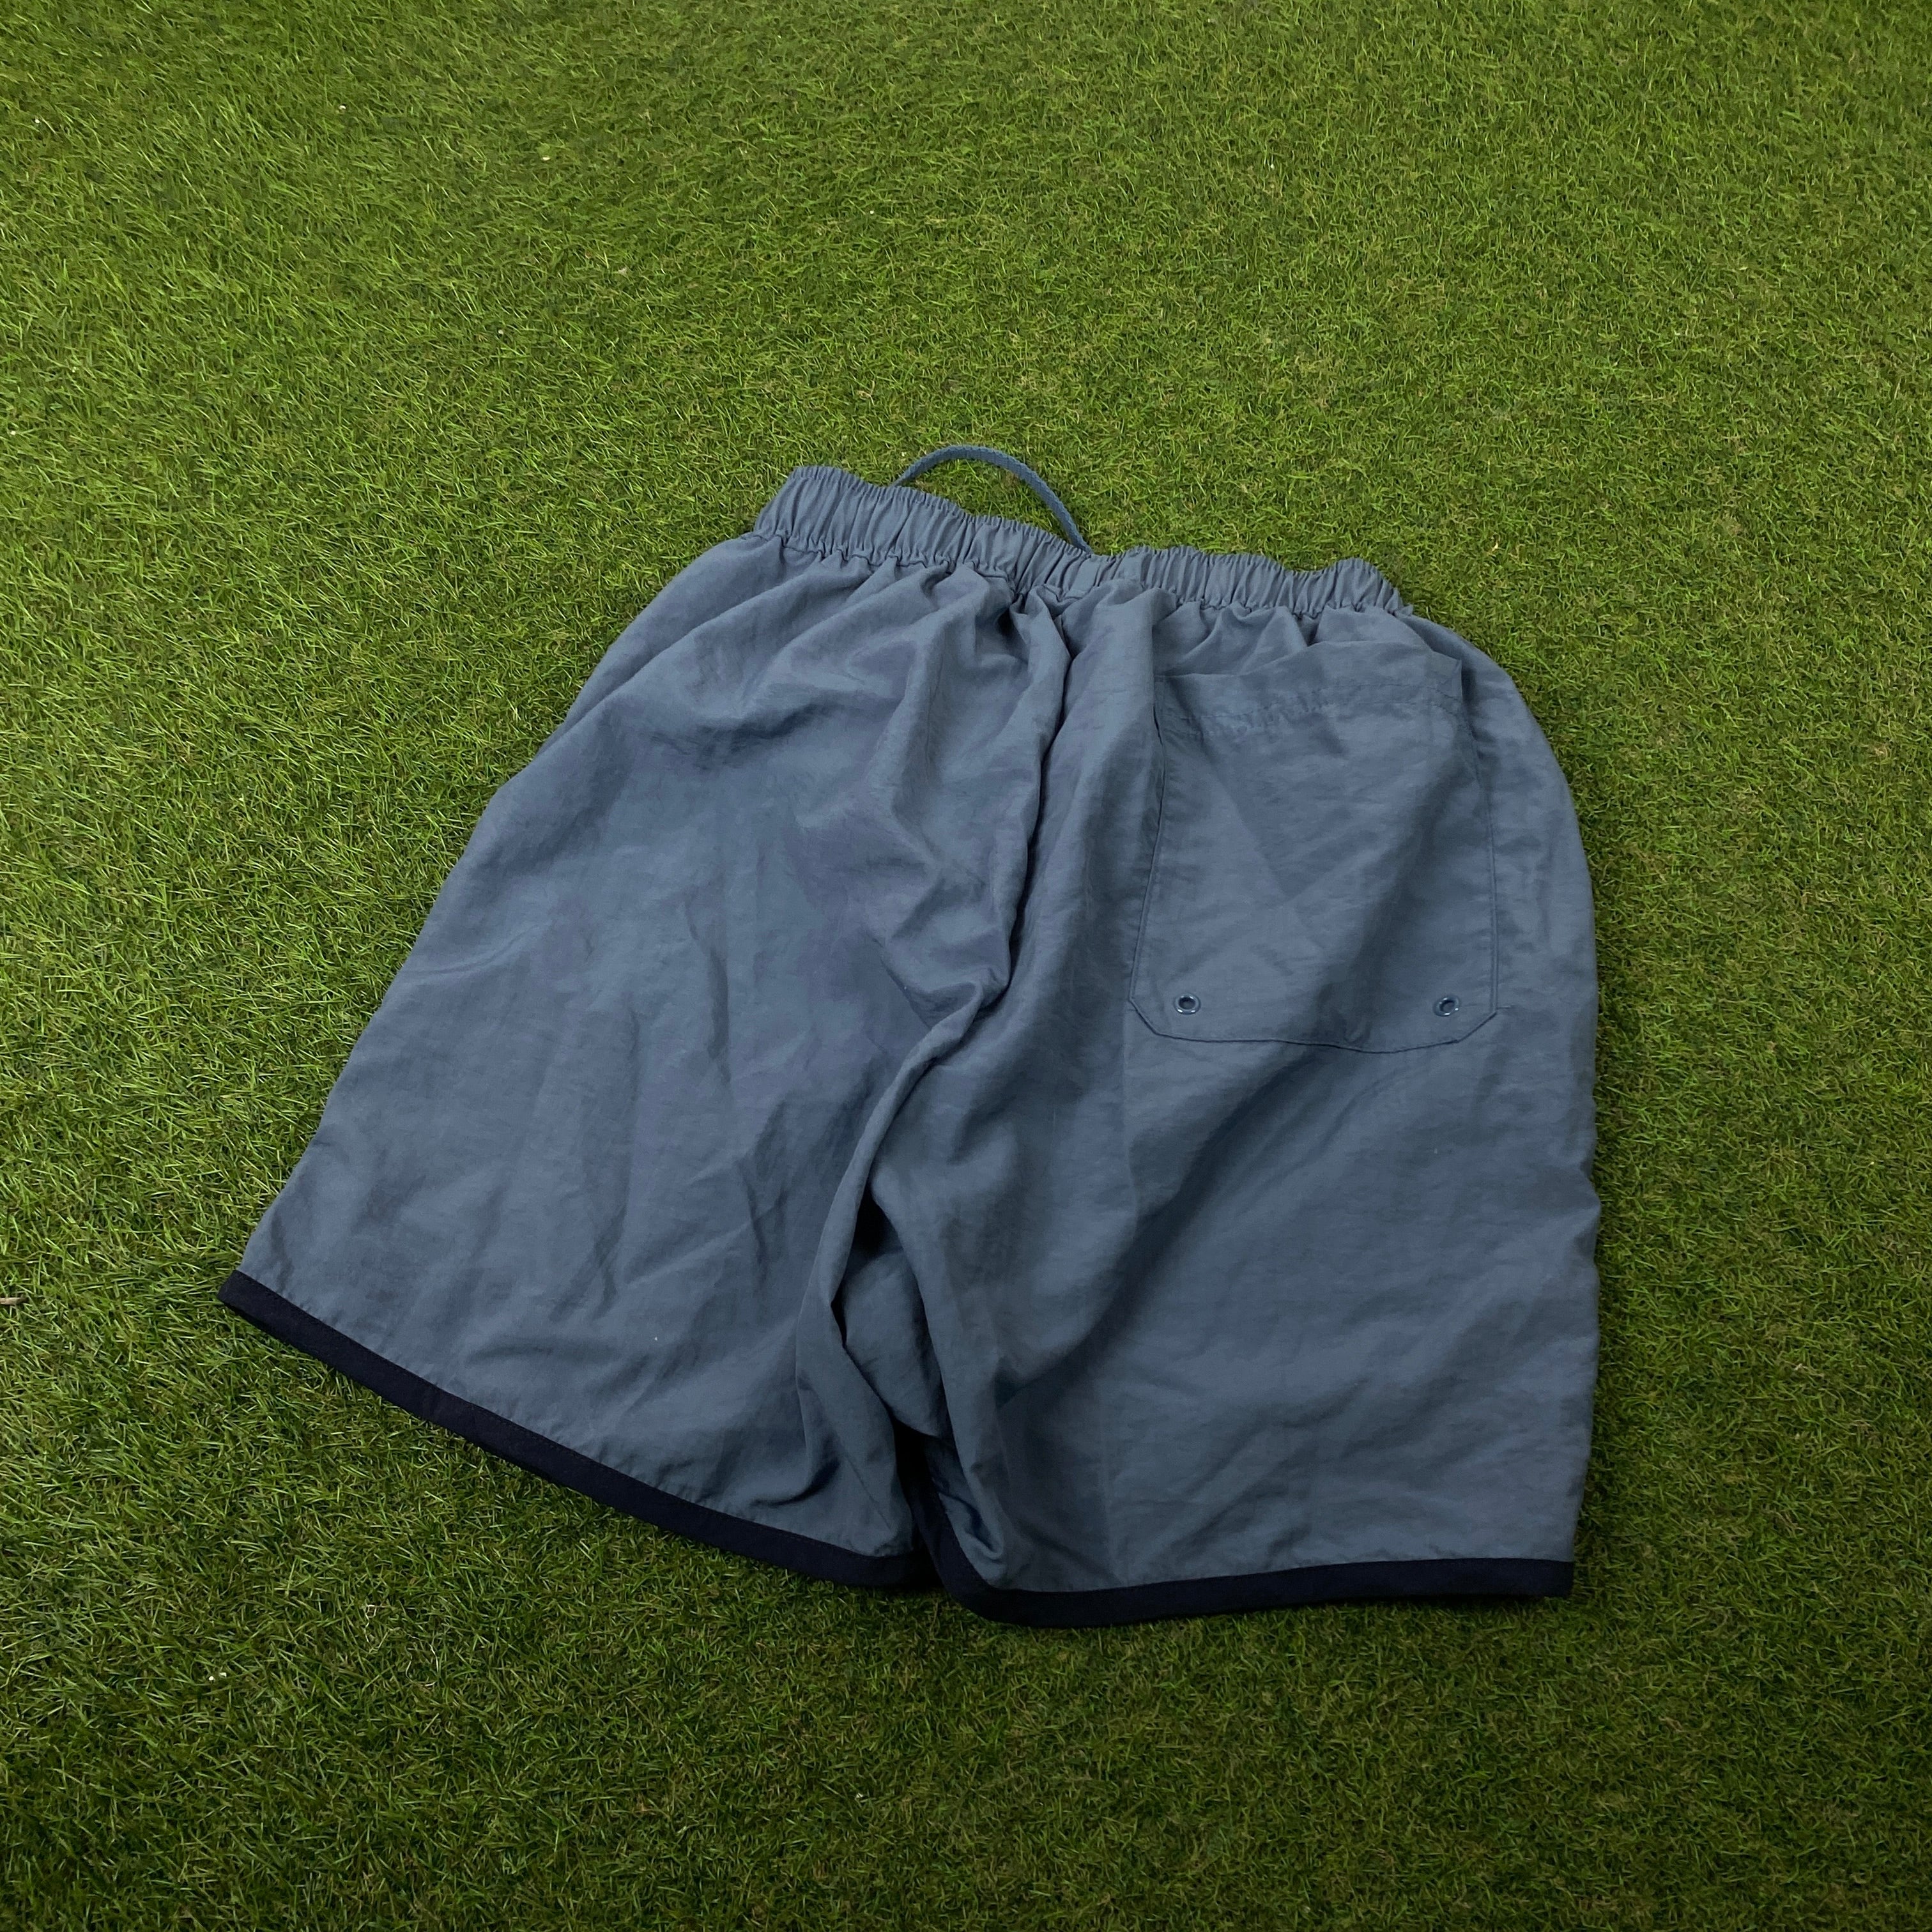 00s Nike Gym Shorts Blue Small